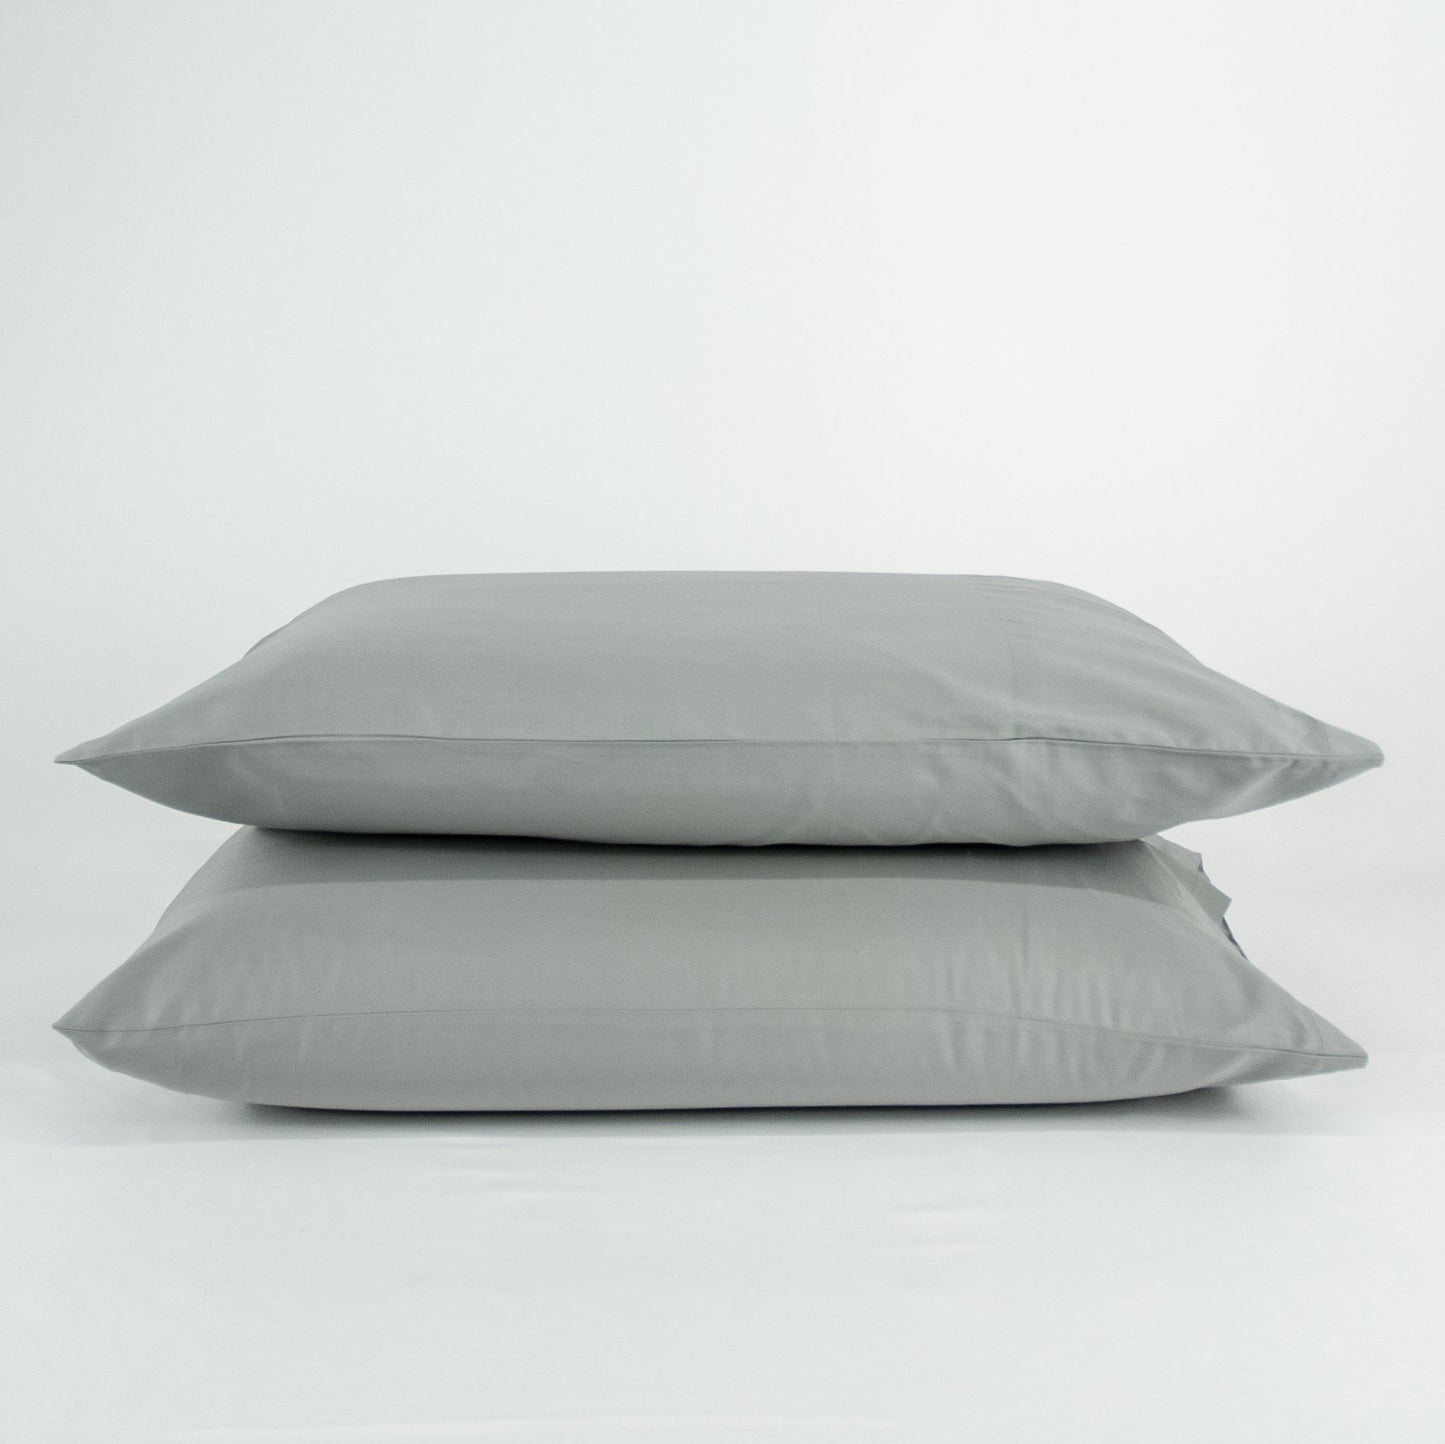 Stacked organic cotton pillowcases in sleet grey